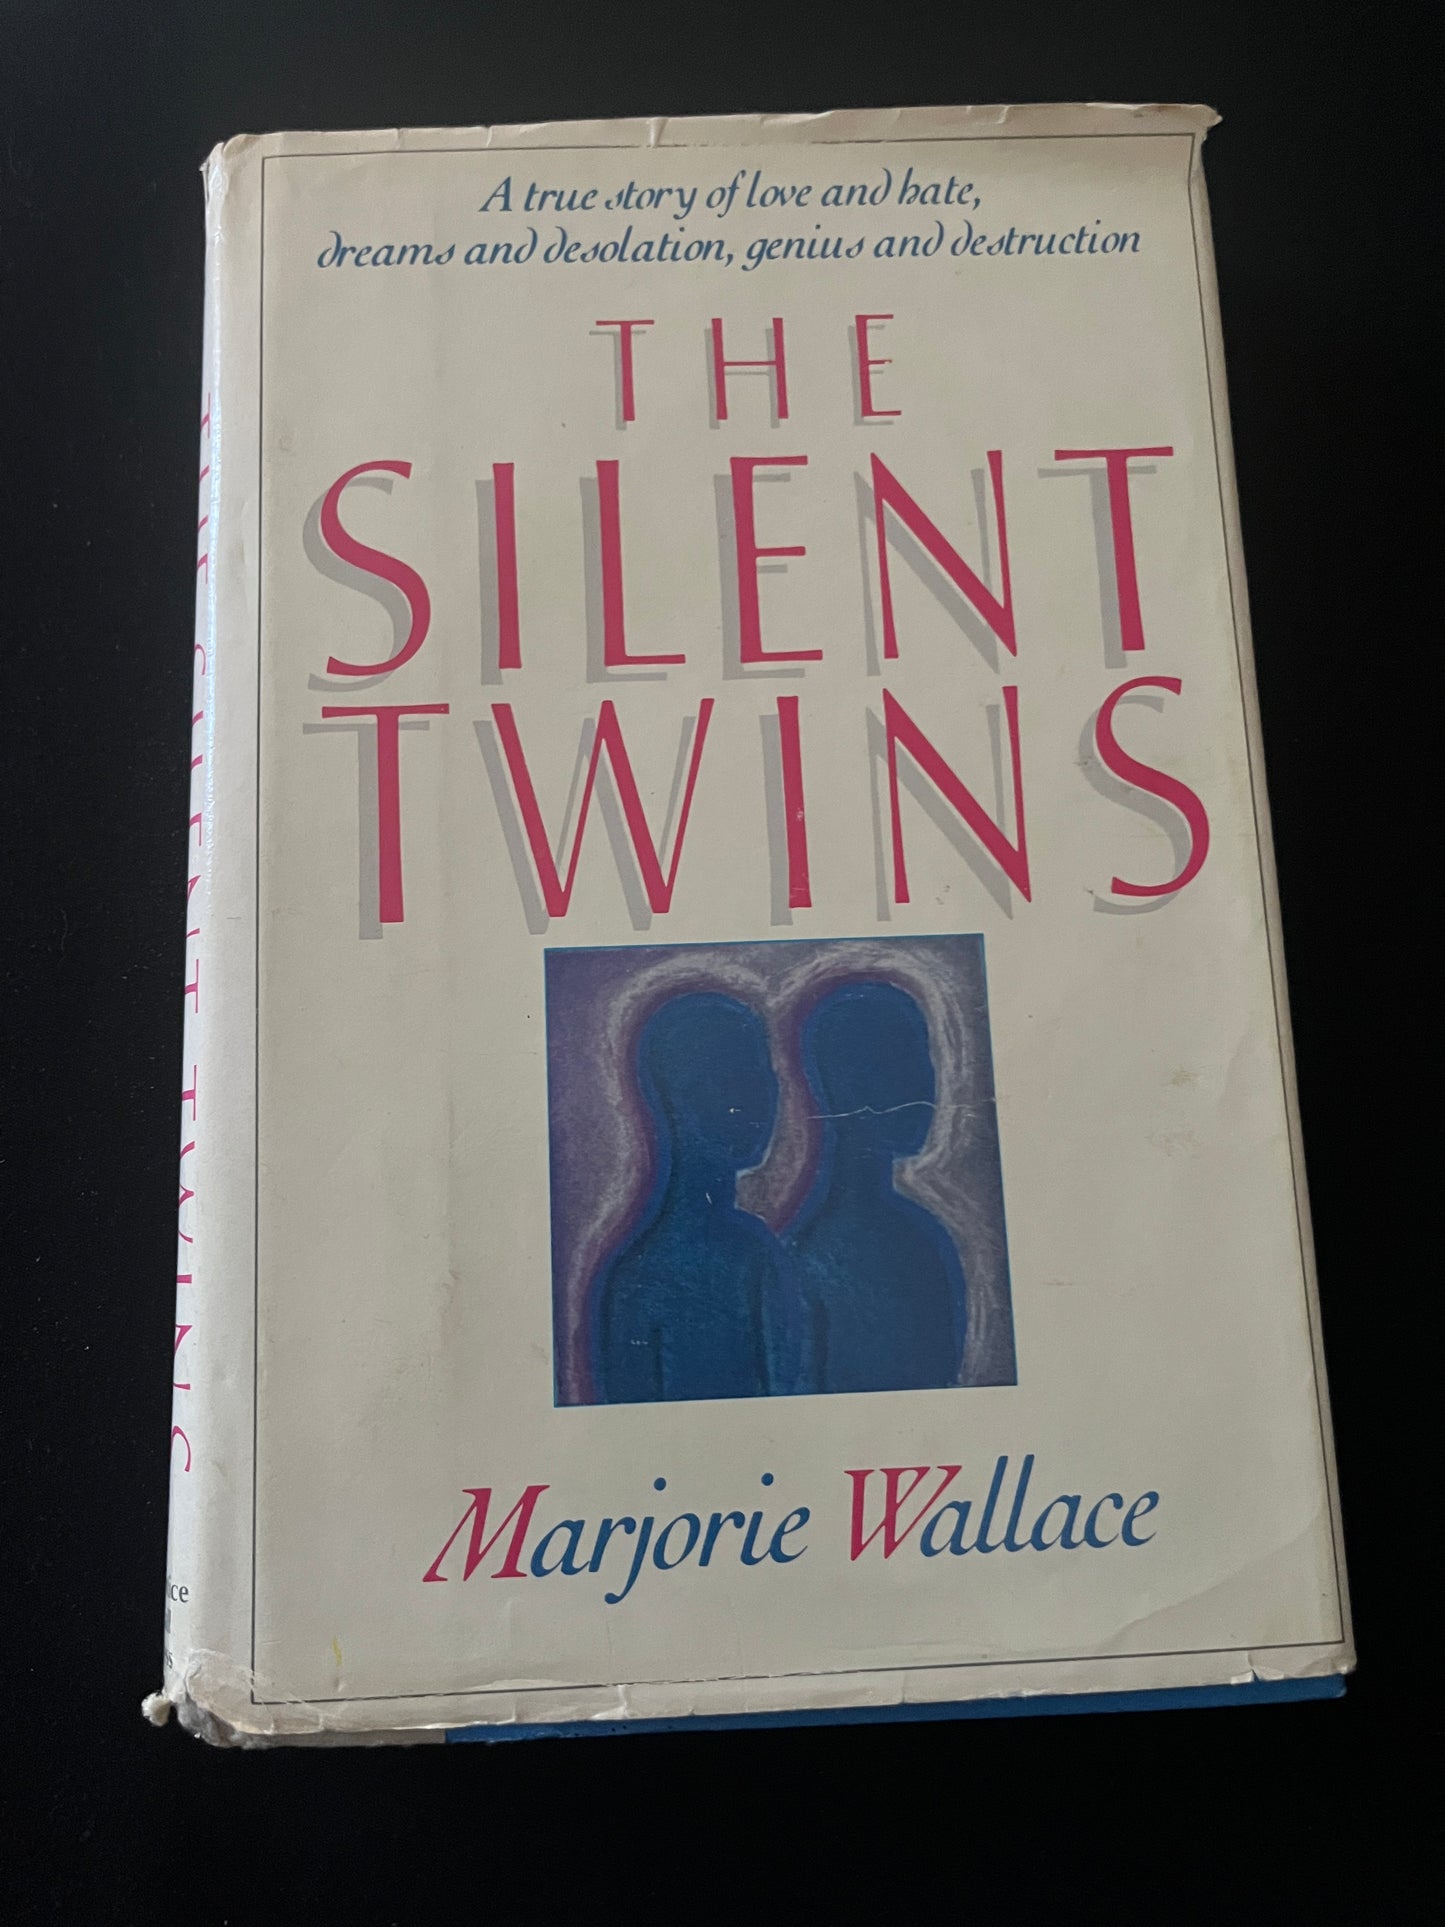 THE SILENT TWINS by Marjorie Wallace